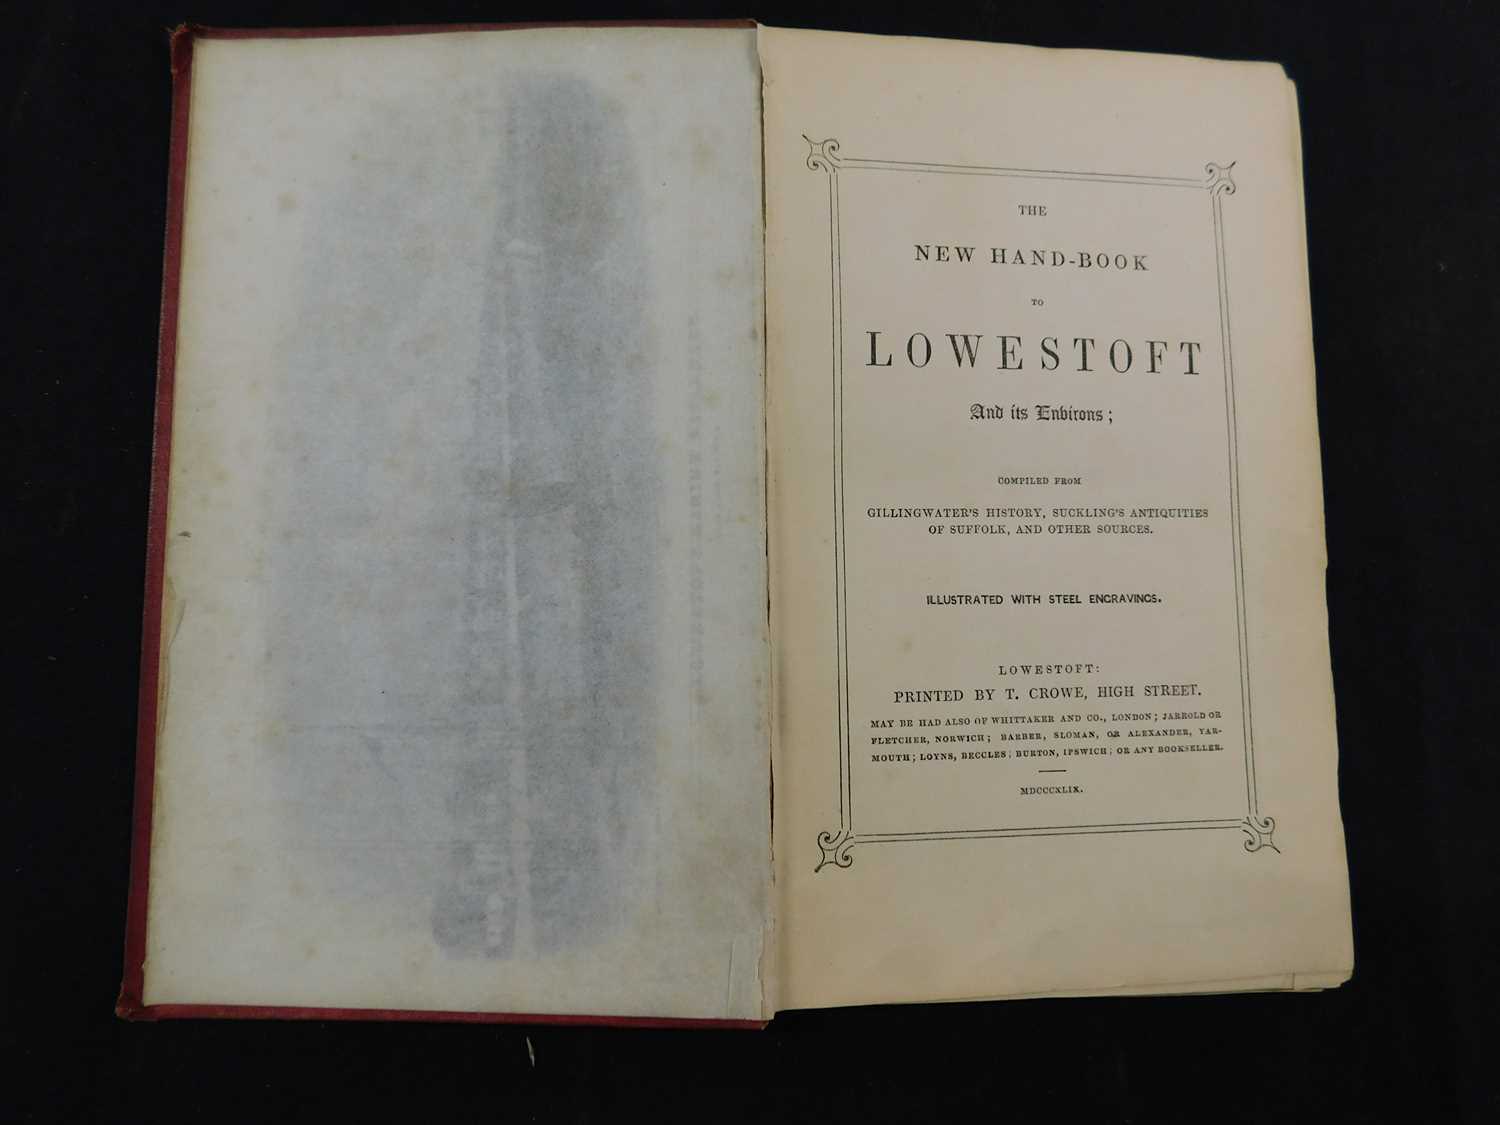 NEW HAND-BOOK TO LOWESTOFT AND ITS ENVIRONS, Lowestoft, printed by T Crowe, 1849, first edition, 4 - Image 2 of 2